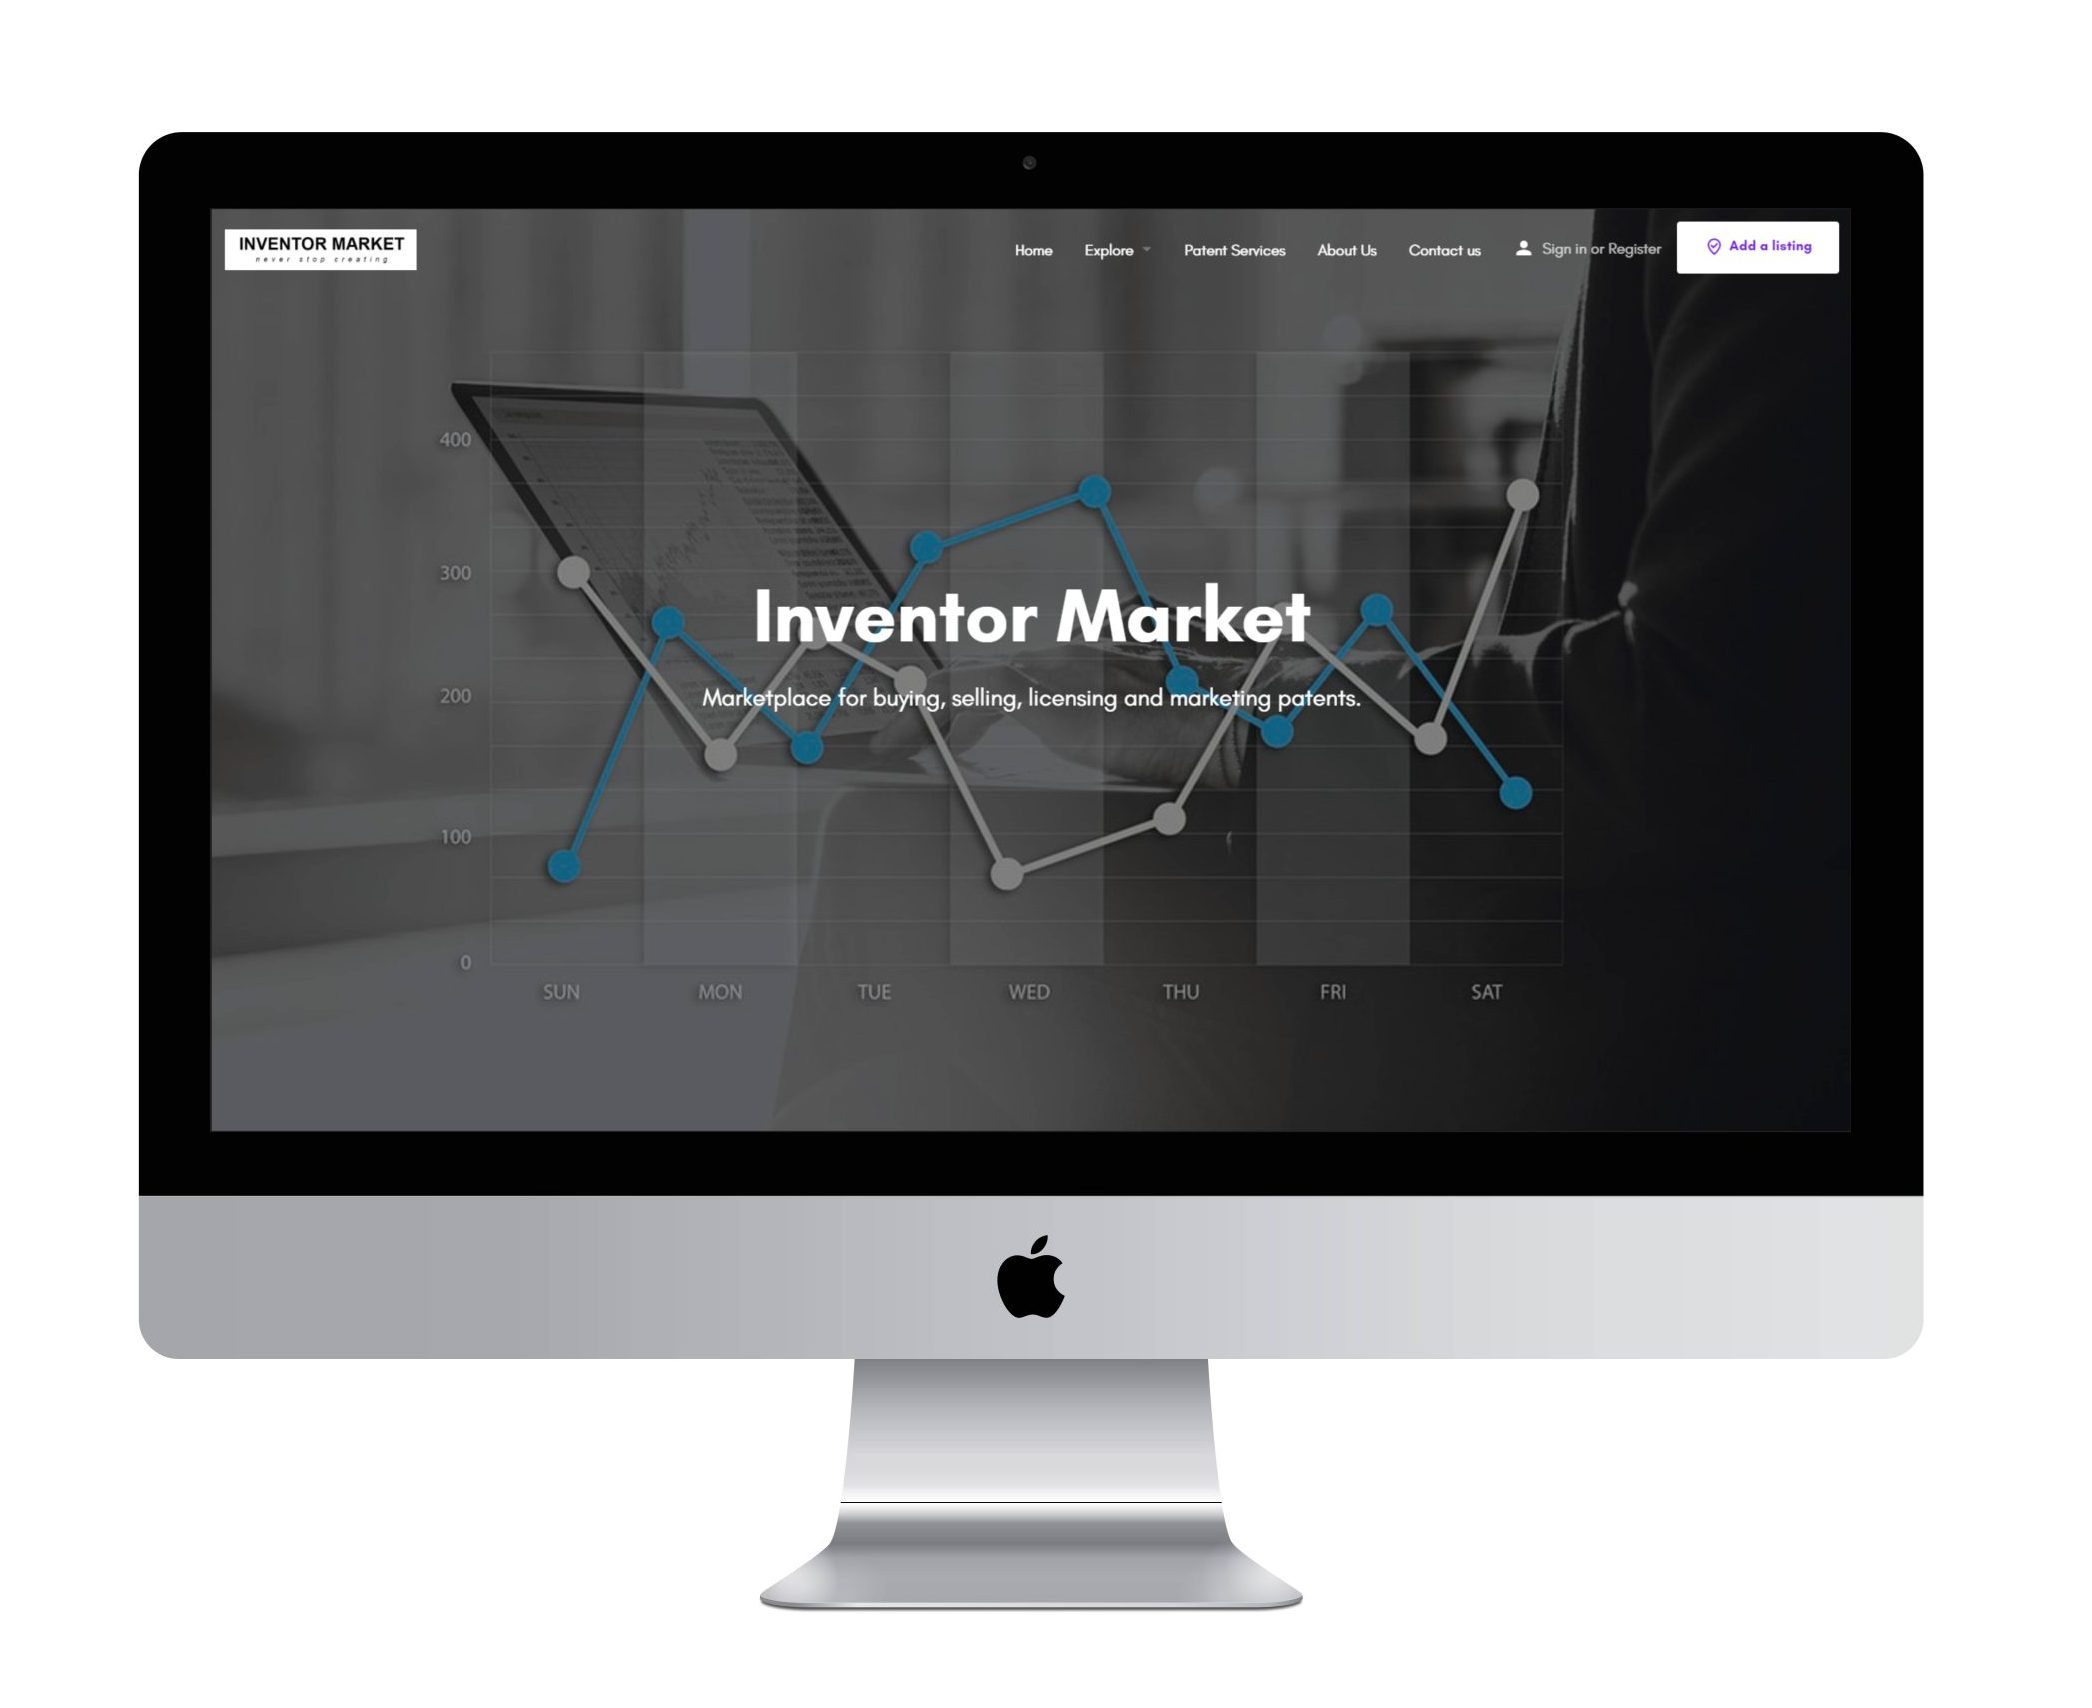 Portfolio image displaying the user interface of the Inventor Market app.